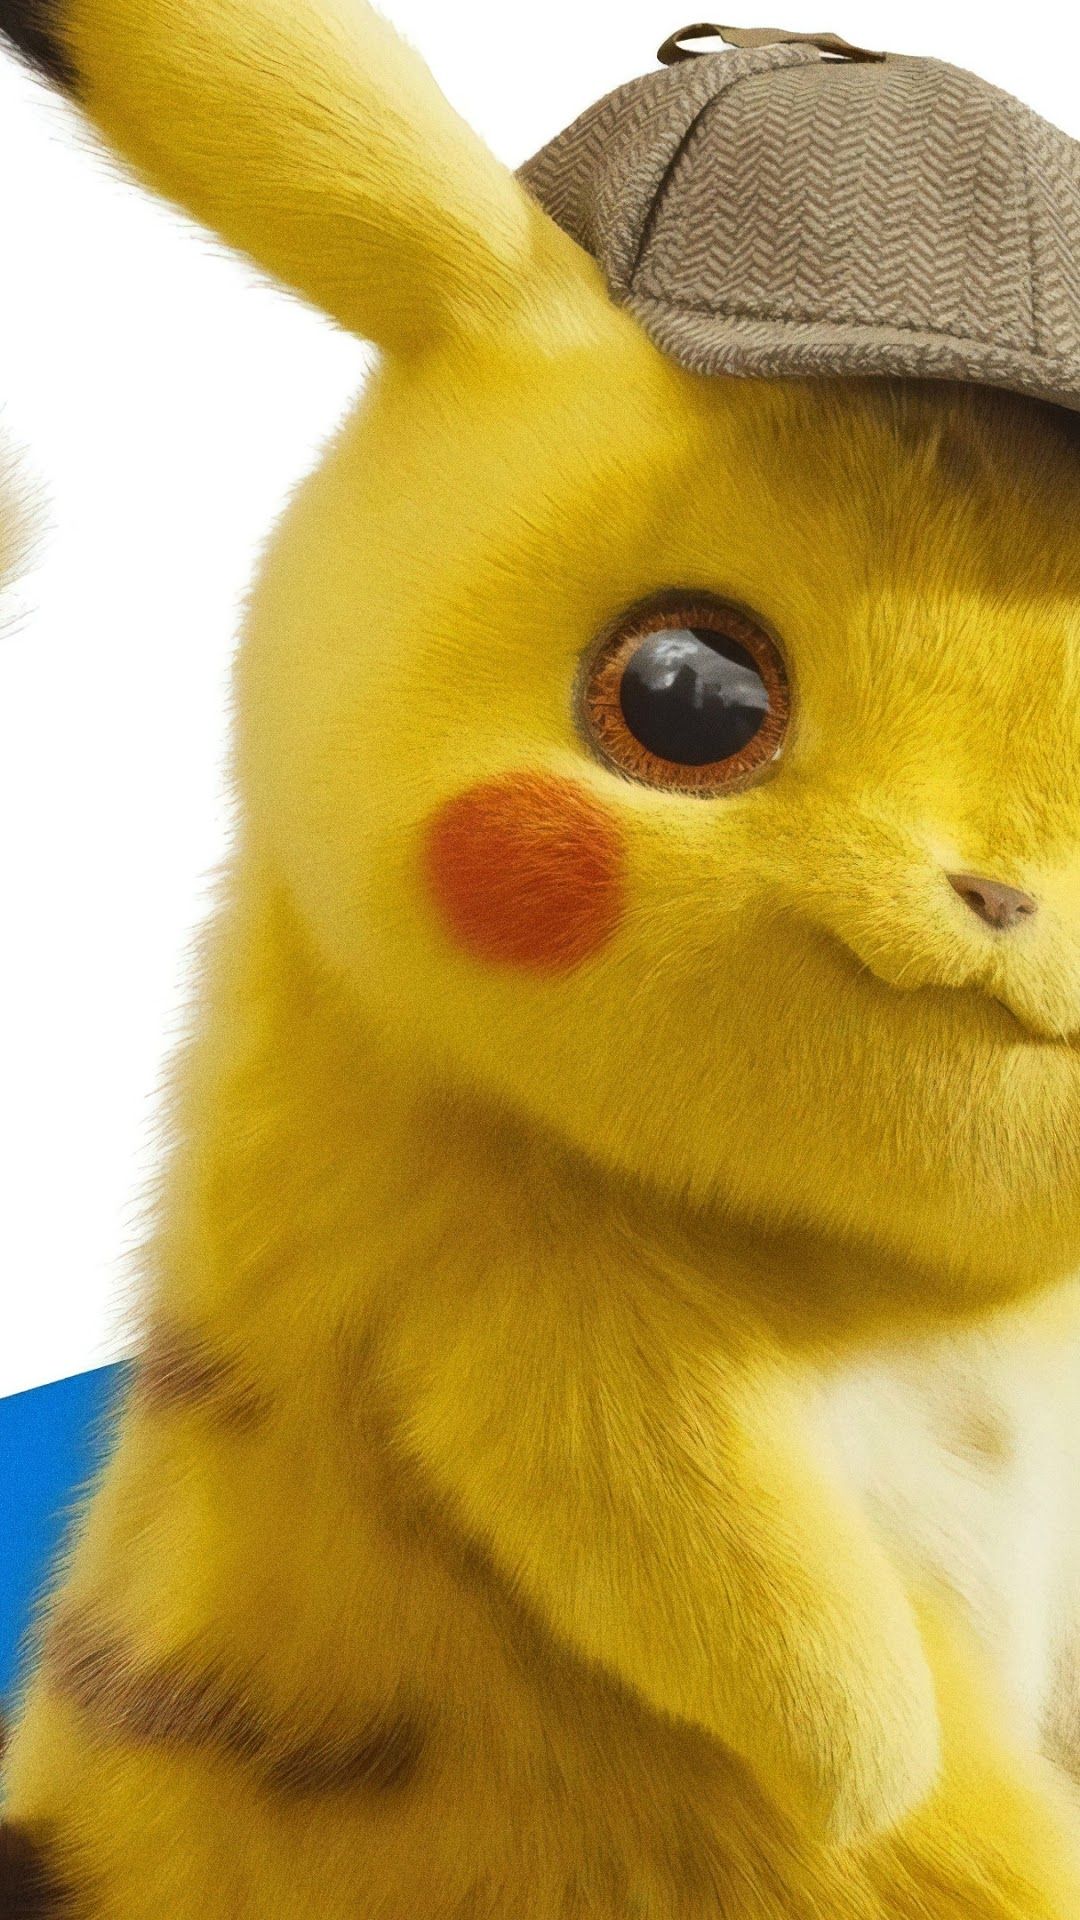 Detective Pikachu phone HD Wallpaper, Image, Background, Photo and Picture. Mocah HD Wallpaper